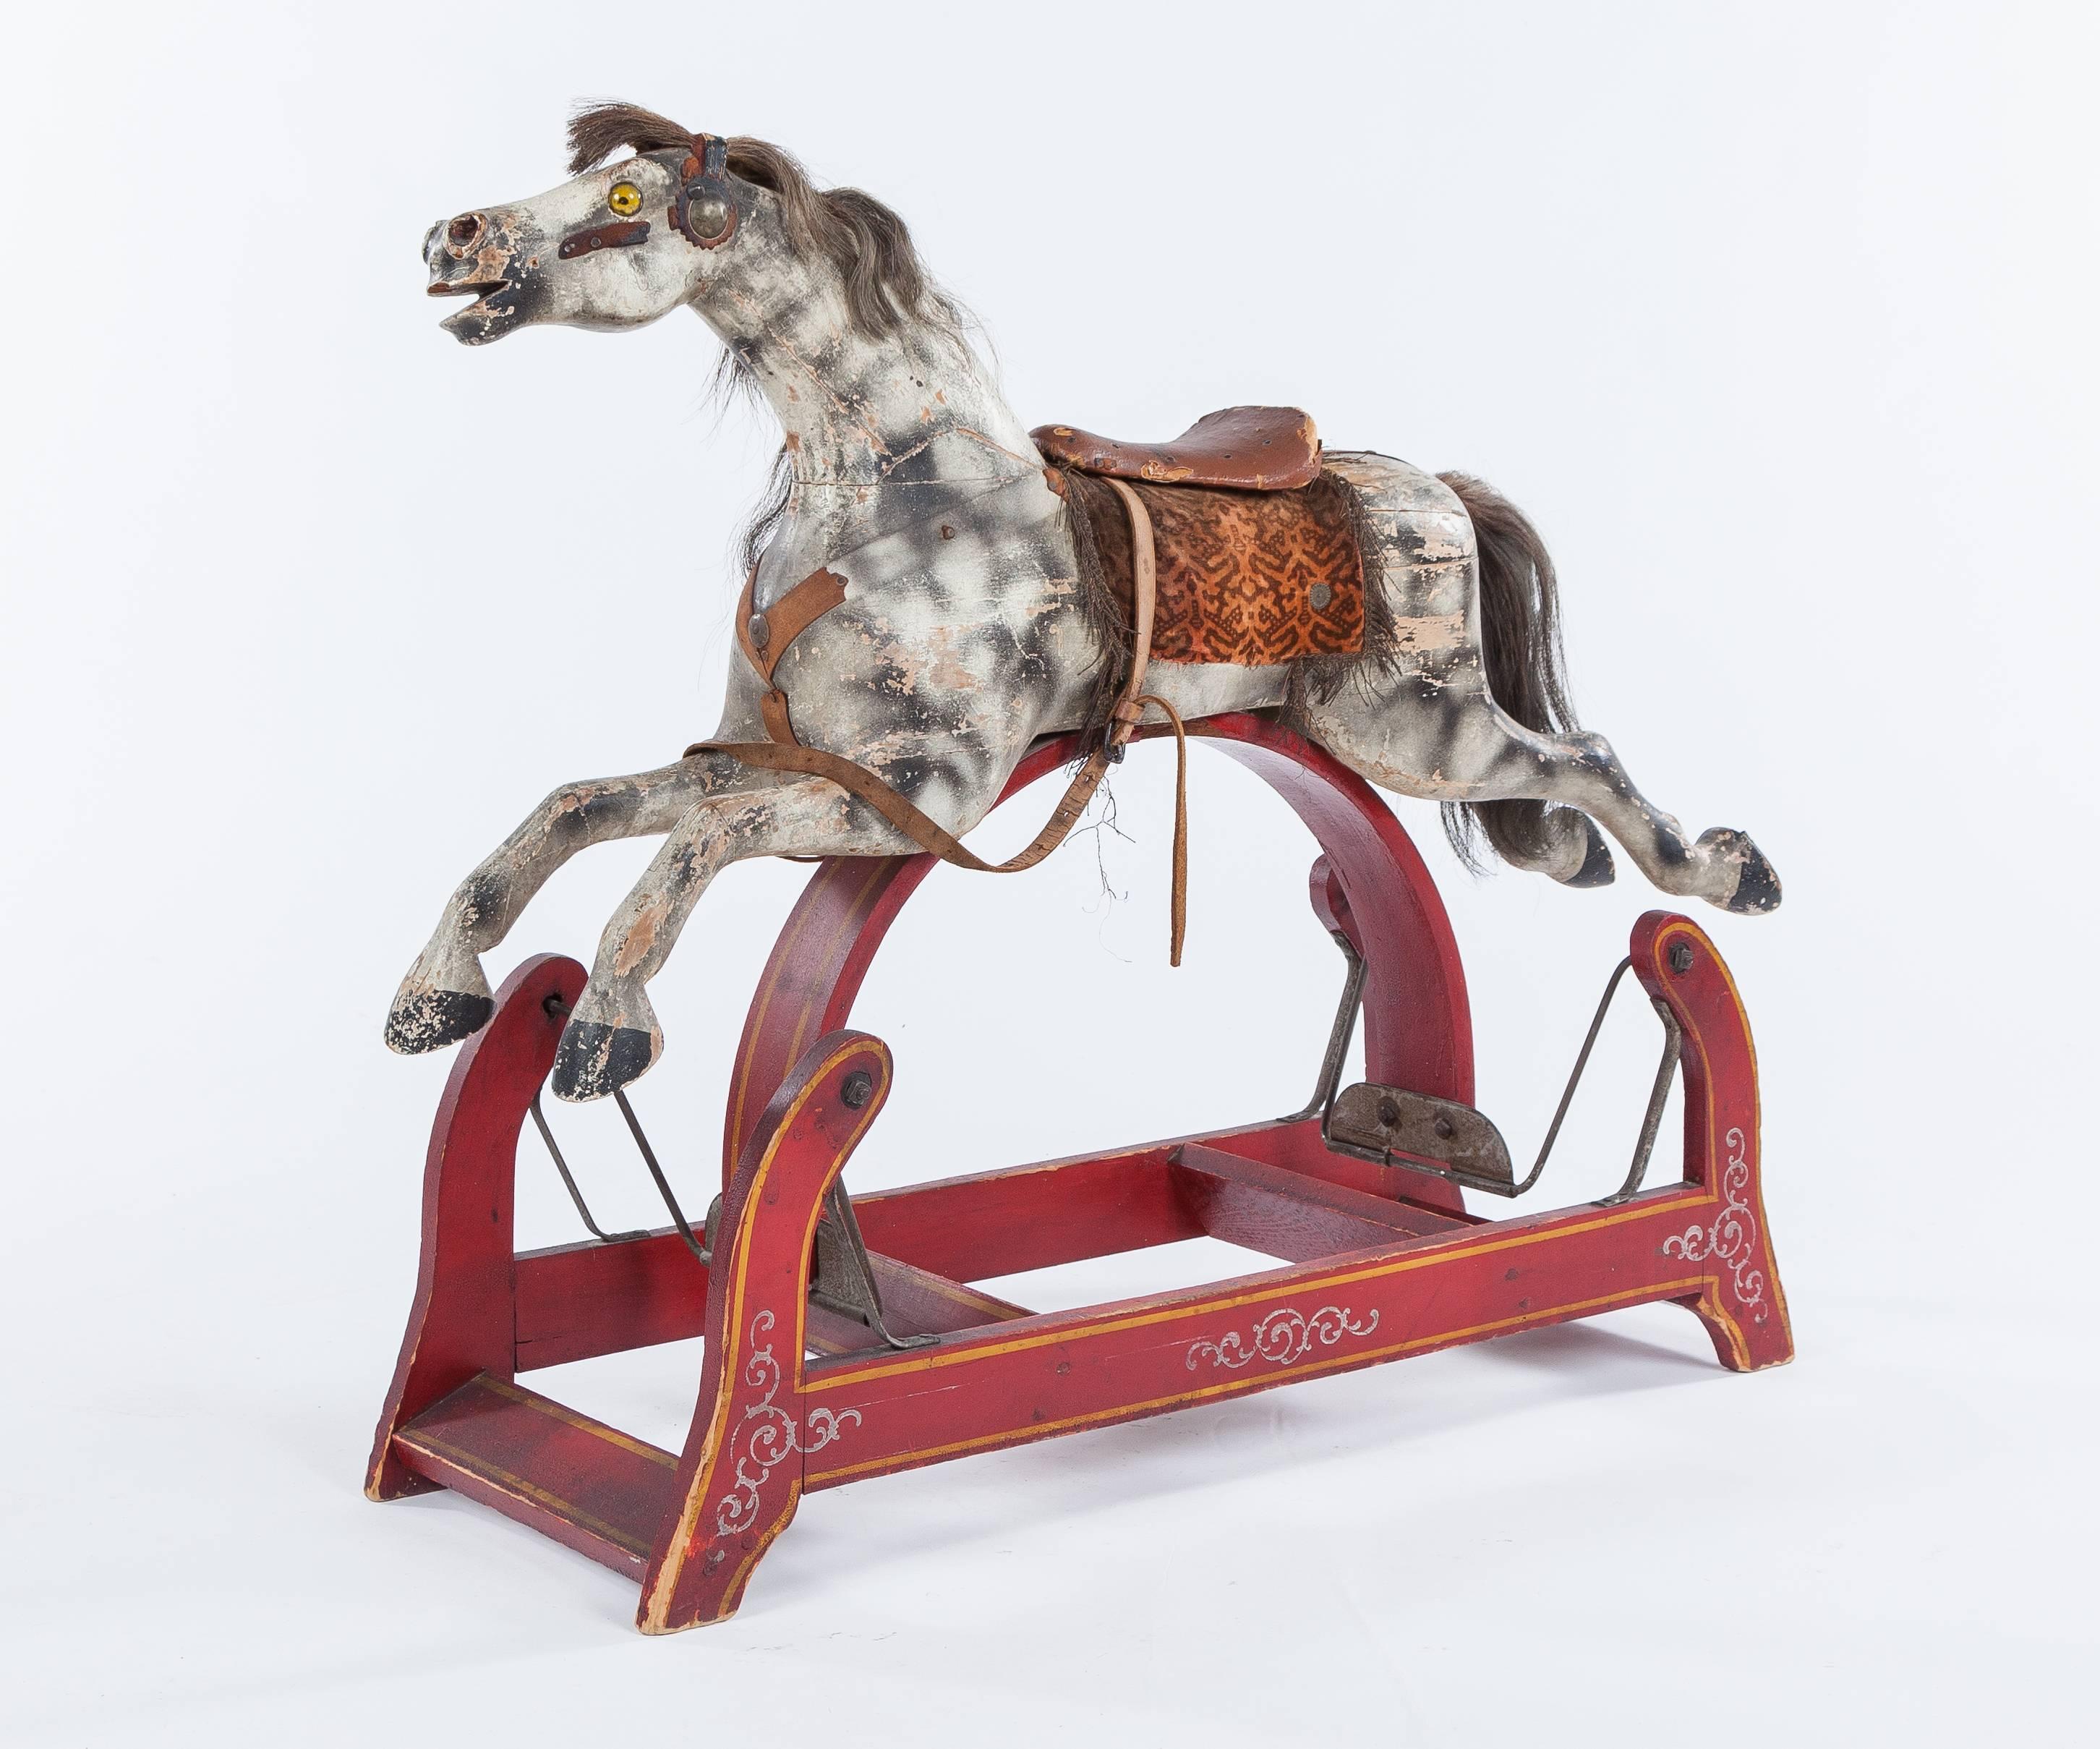 An American antique rocking horse dating to the mid-19th century. The rocking horse measures approximately 37